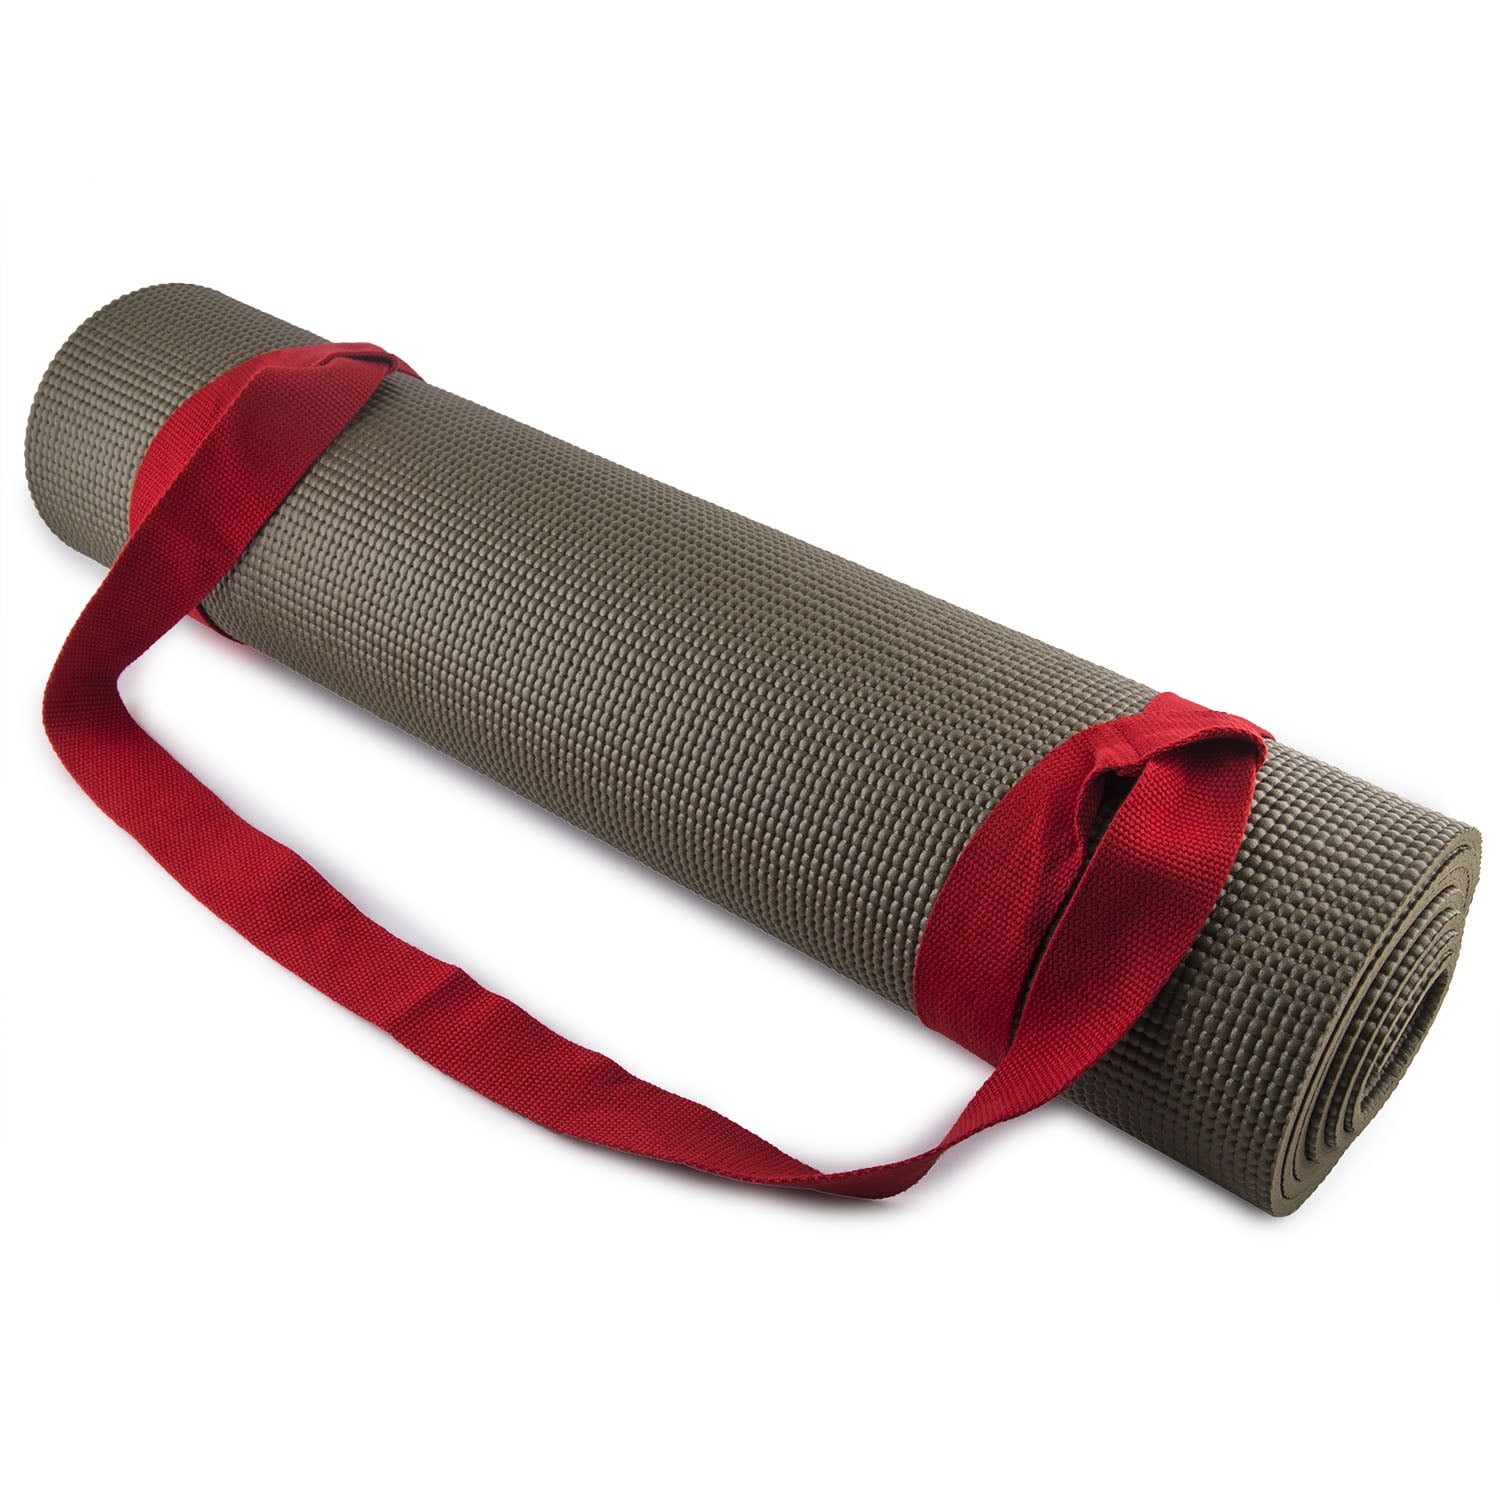 Yoga Mat Sling and Yoga Strap for Stretching 2 in 1,Durable Functional Mat Carrying Strap,Plus One Ring,Easy to Adjust.Double AS A Yoga Strap & Pose AID